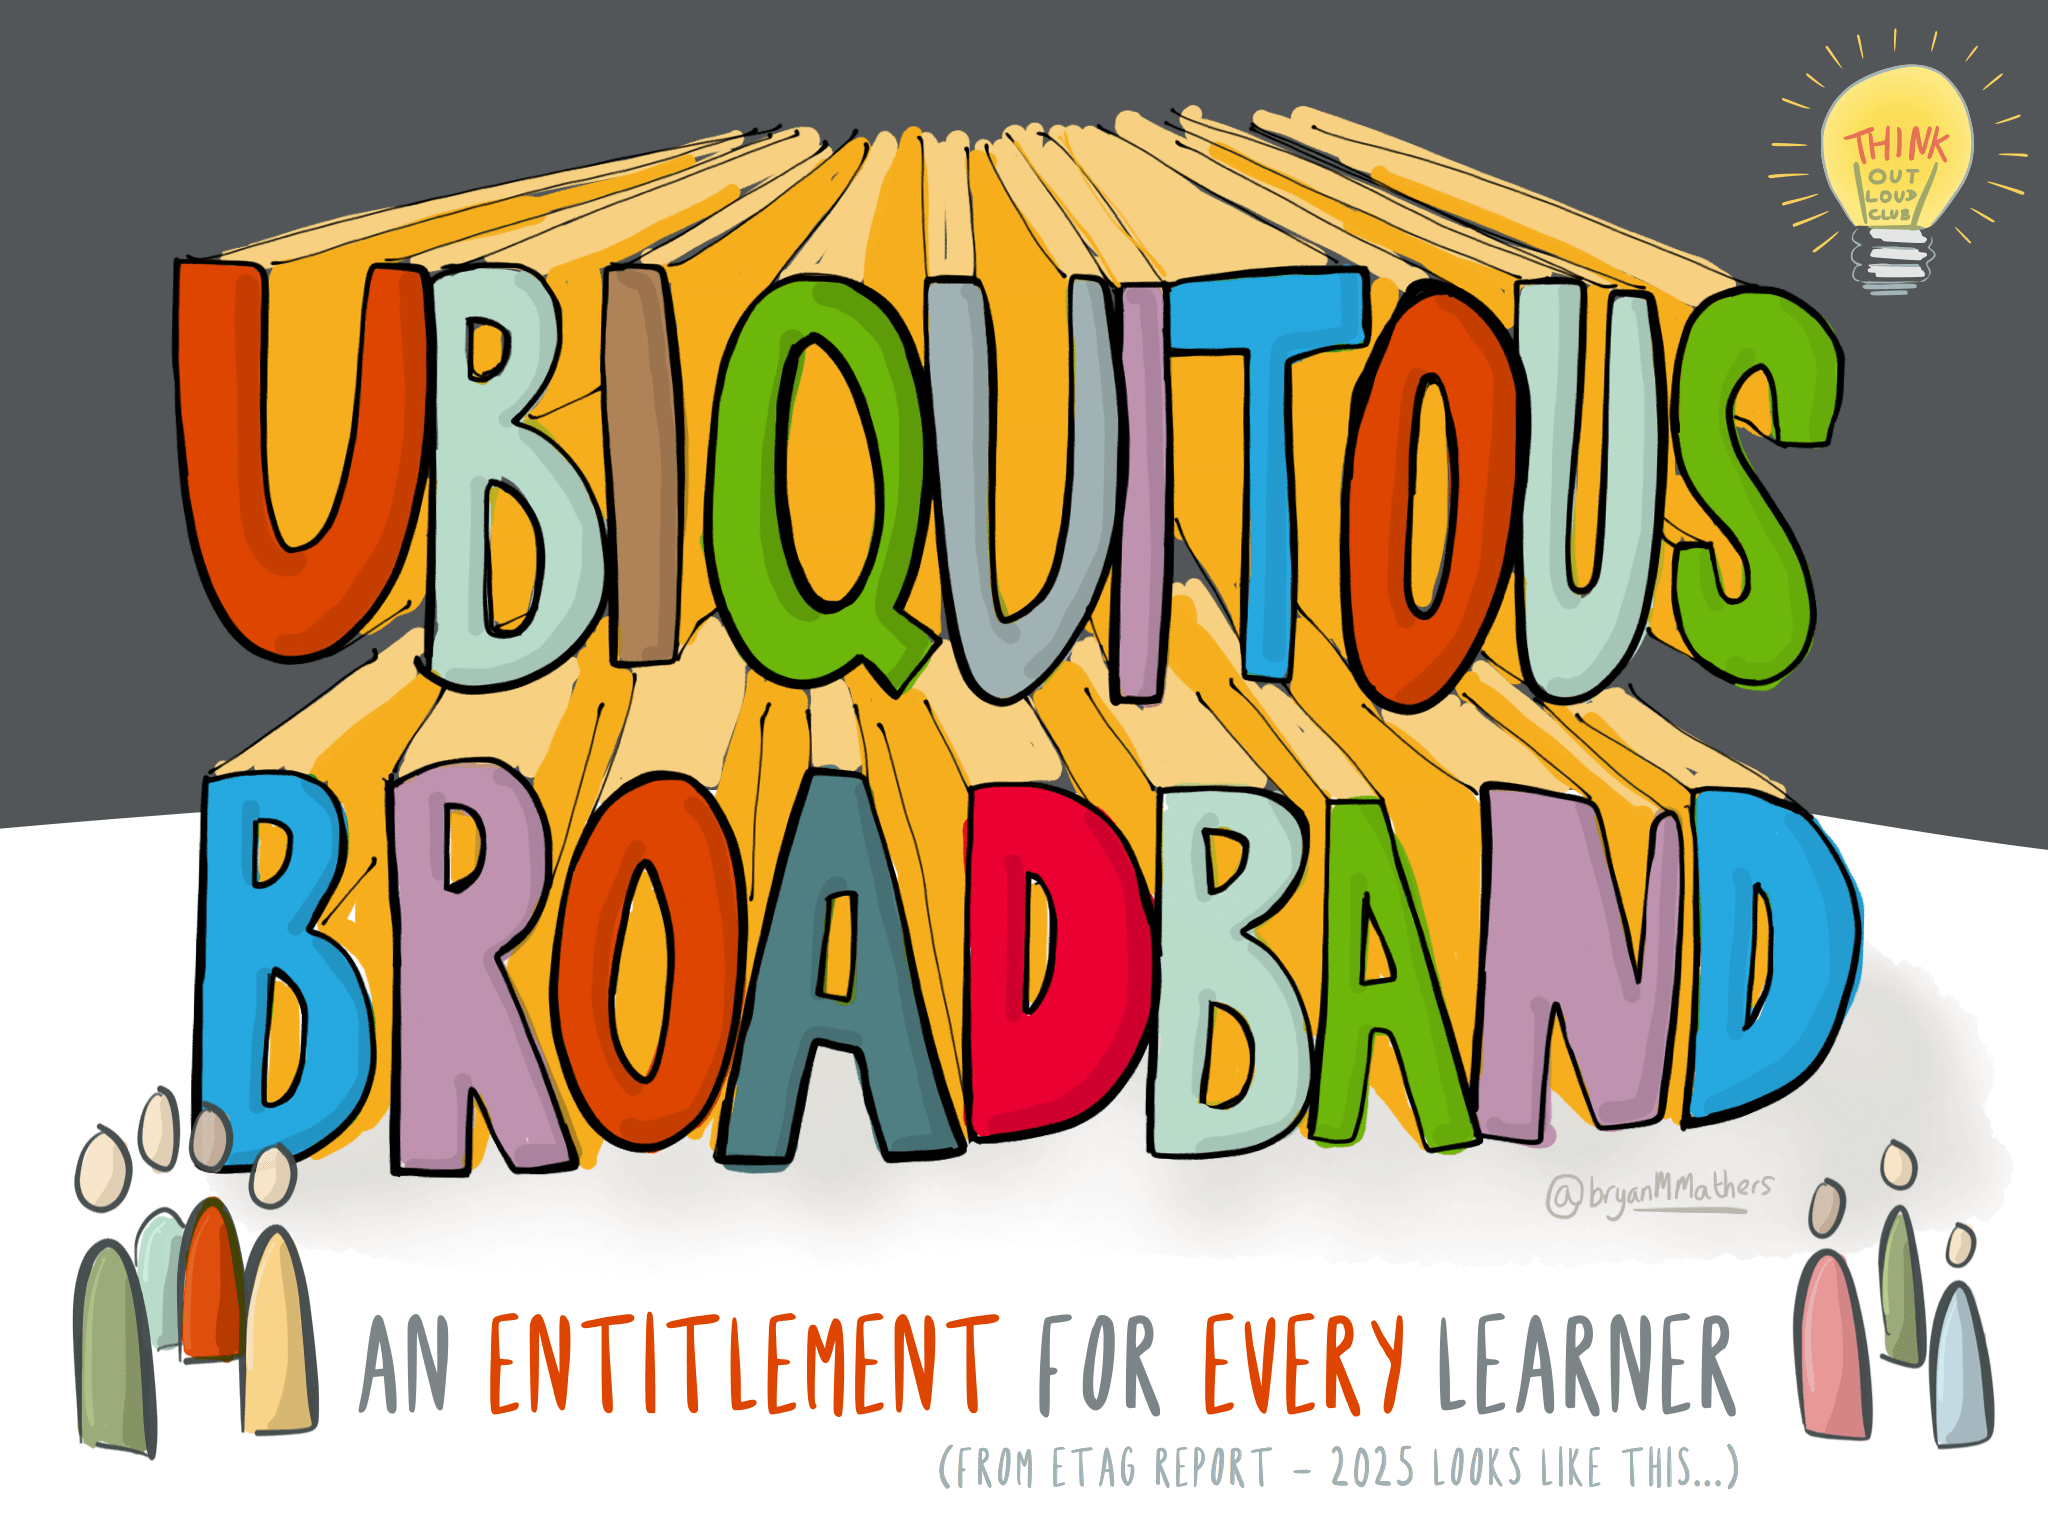 Ubiquitous broadband for every learner